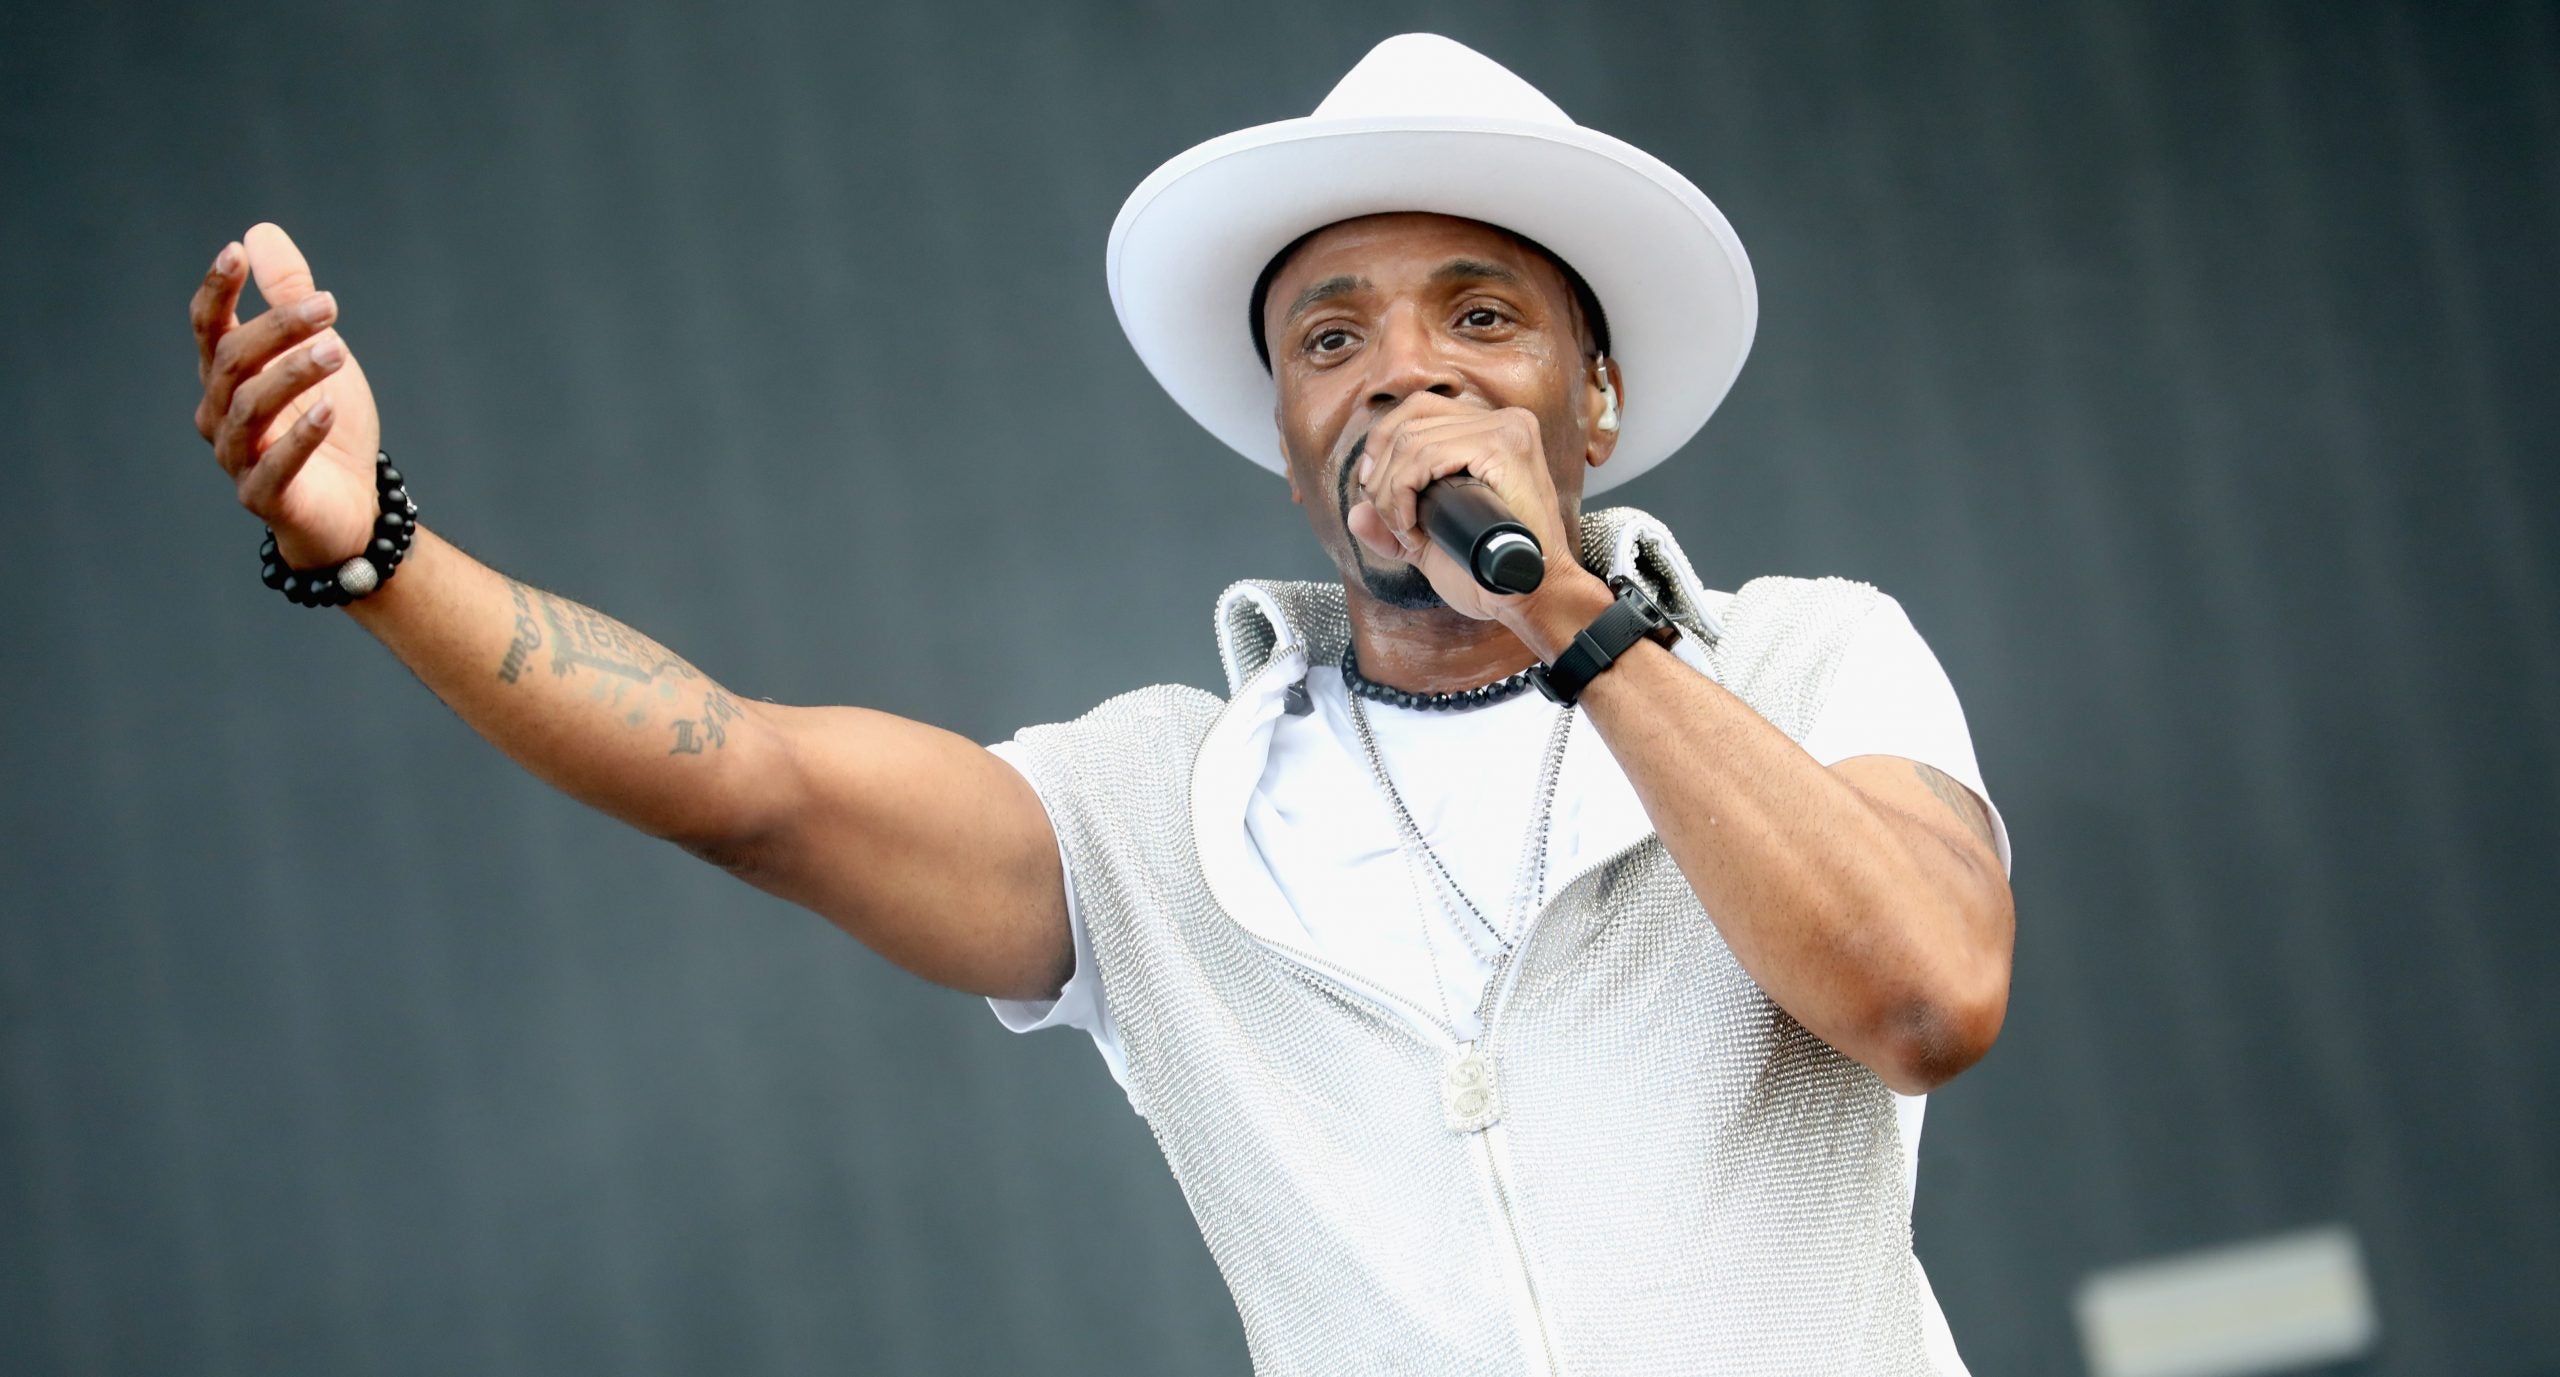 Teddy Riley's Kids Gave Their Dad His Flowers In This Adorable Video